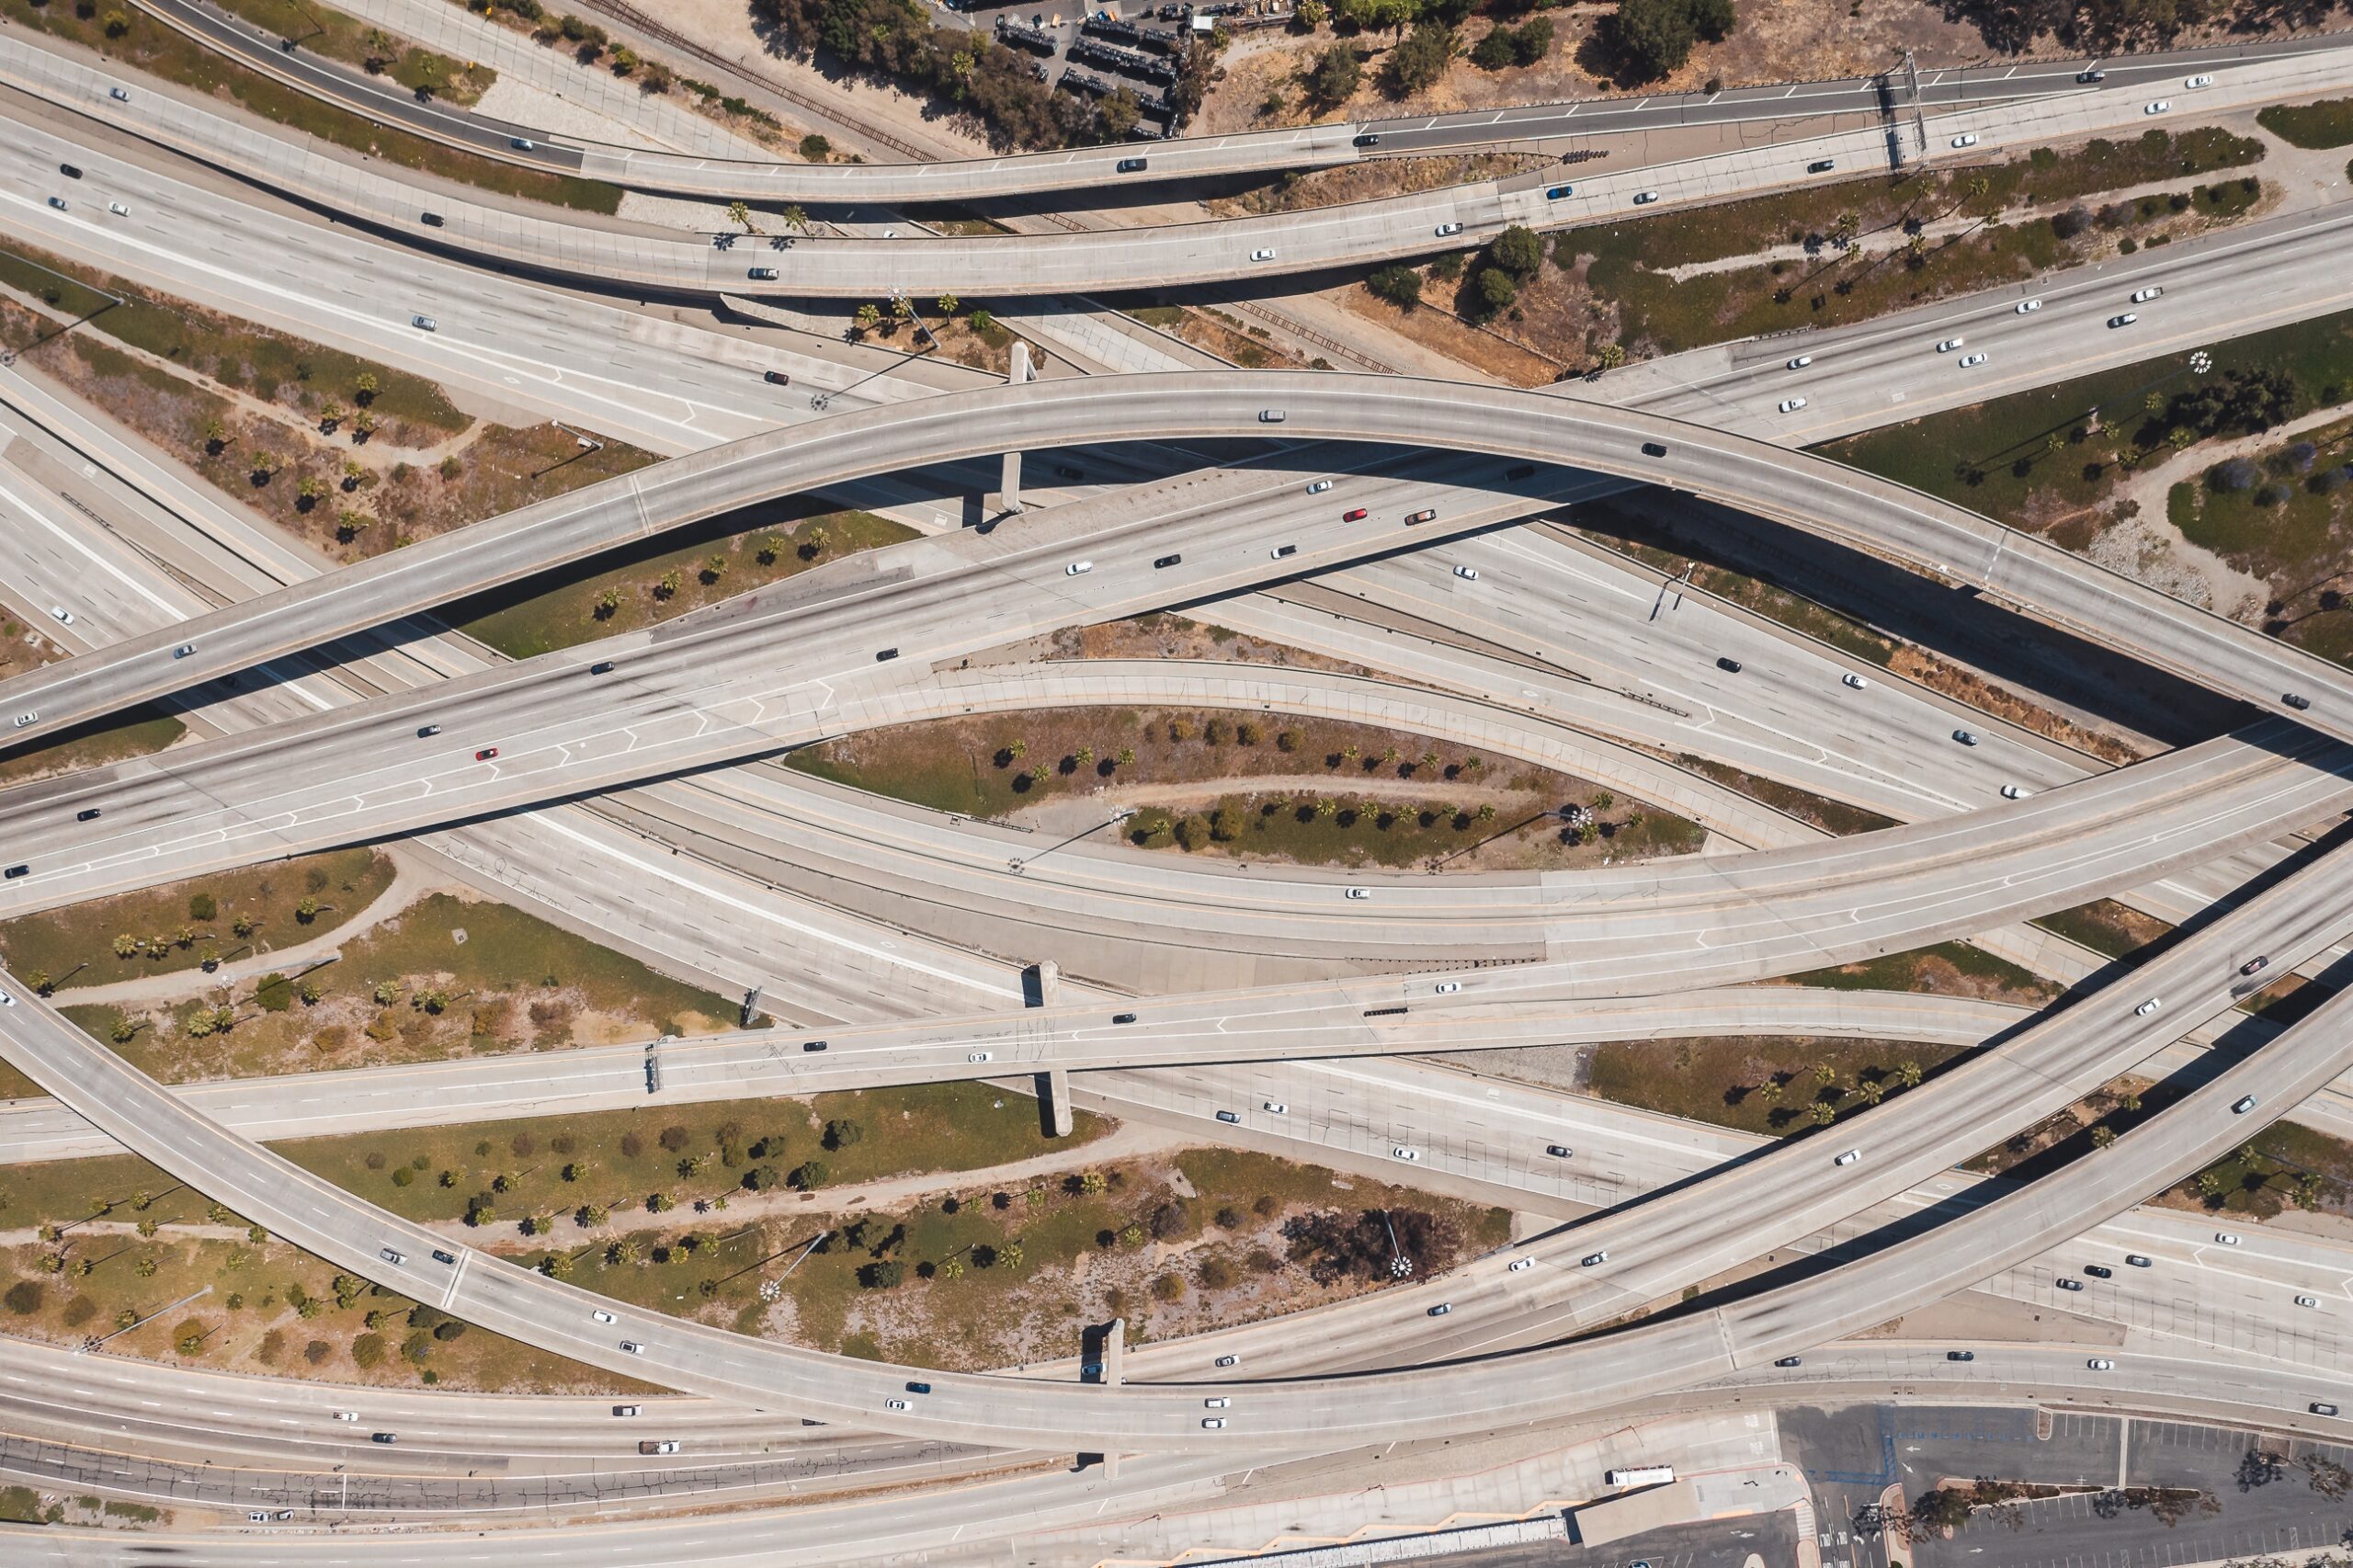 An image of LA overpasses